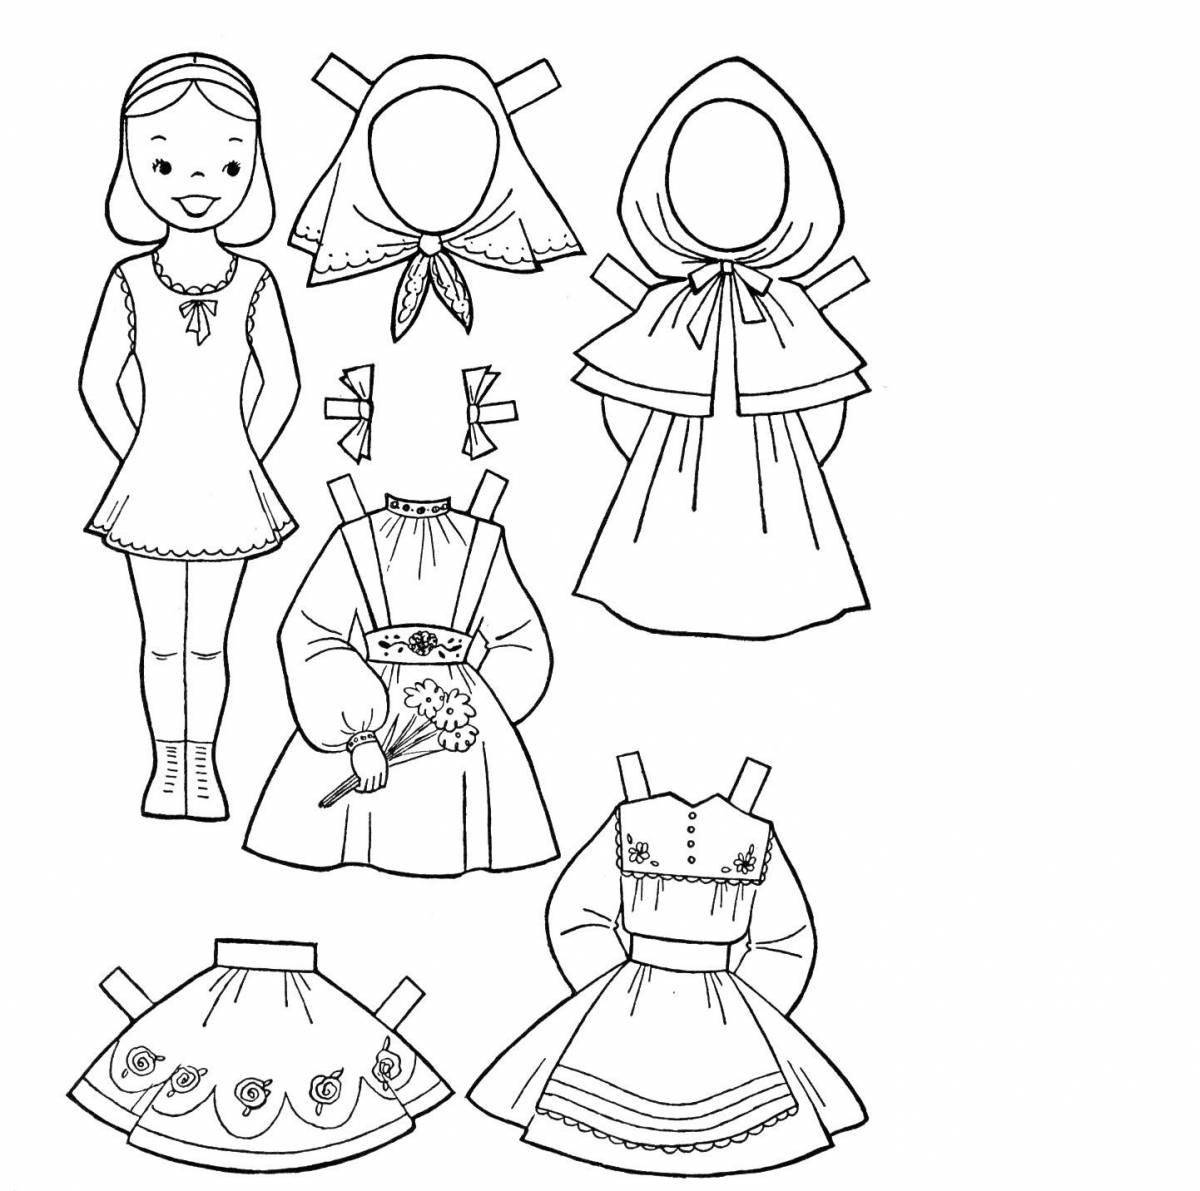 Coloring page cute dress for doll